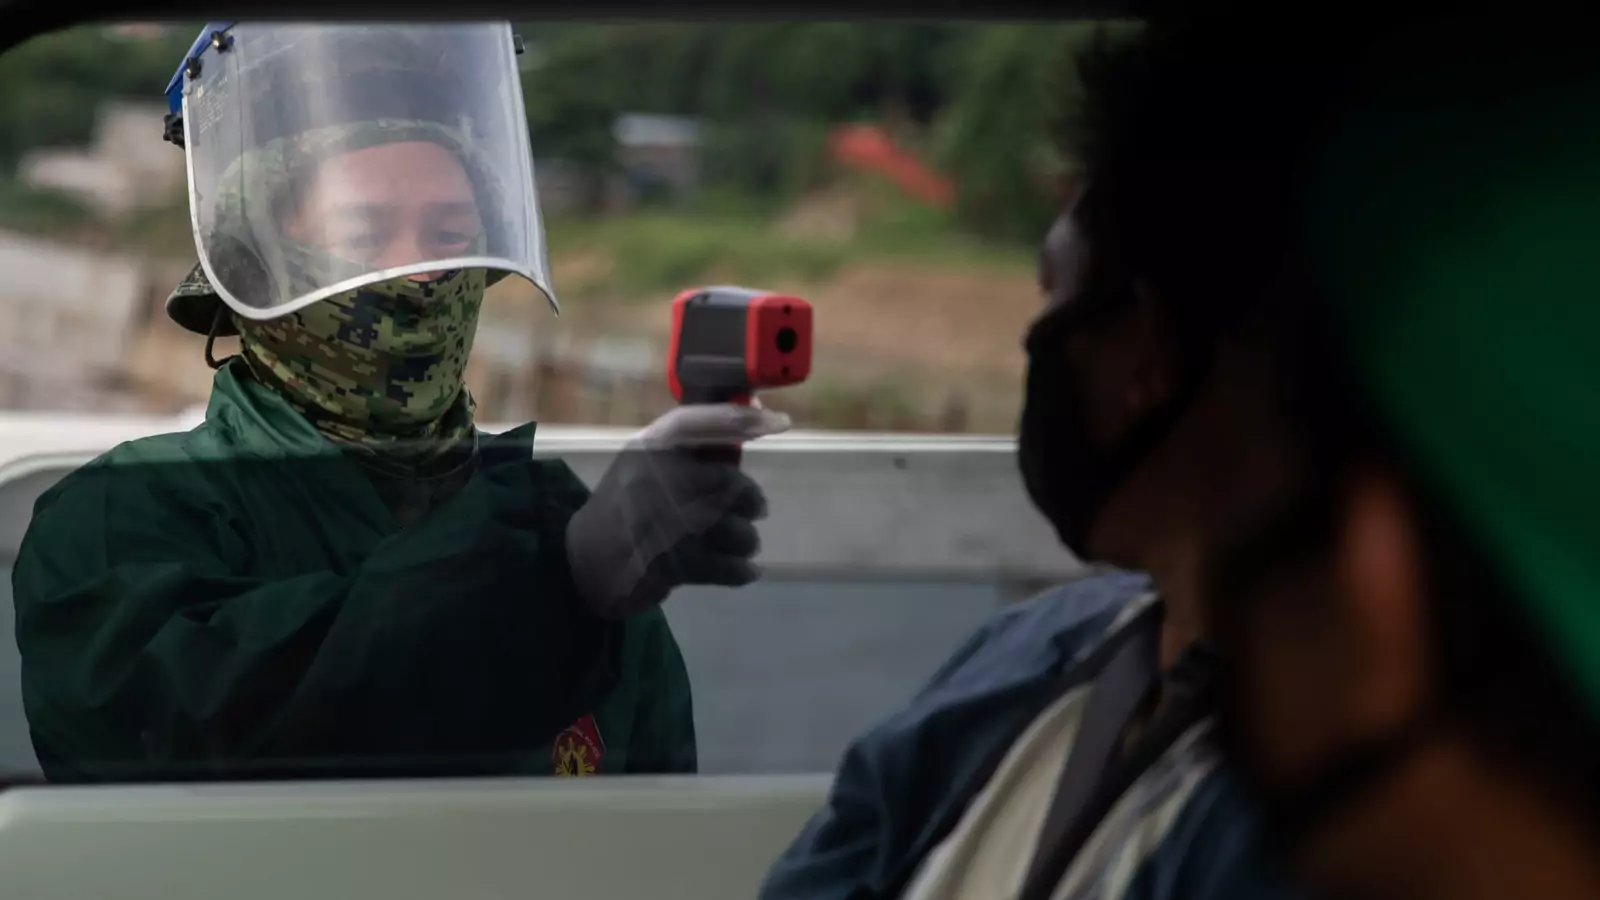 A police officer checks a passenger's body temperature at a quarantine checkpoint amid the reimposed strict lockdown to curb COVID-19 infections, in Quezon City, Metro Manila, Philippines, on August 5, 2020.